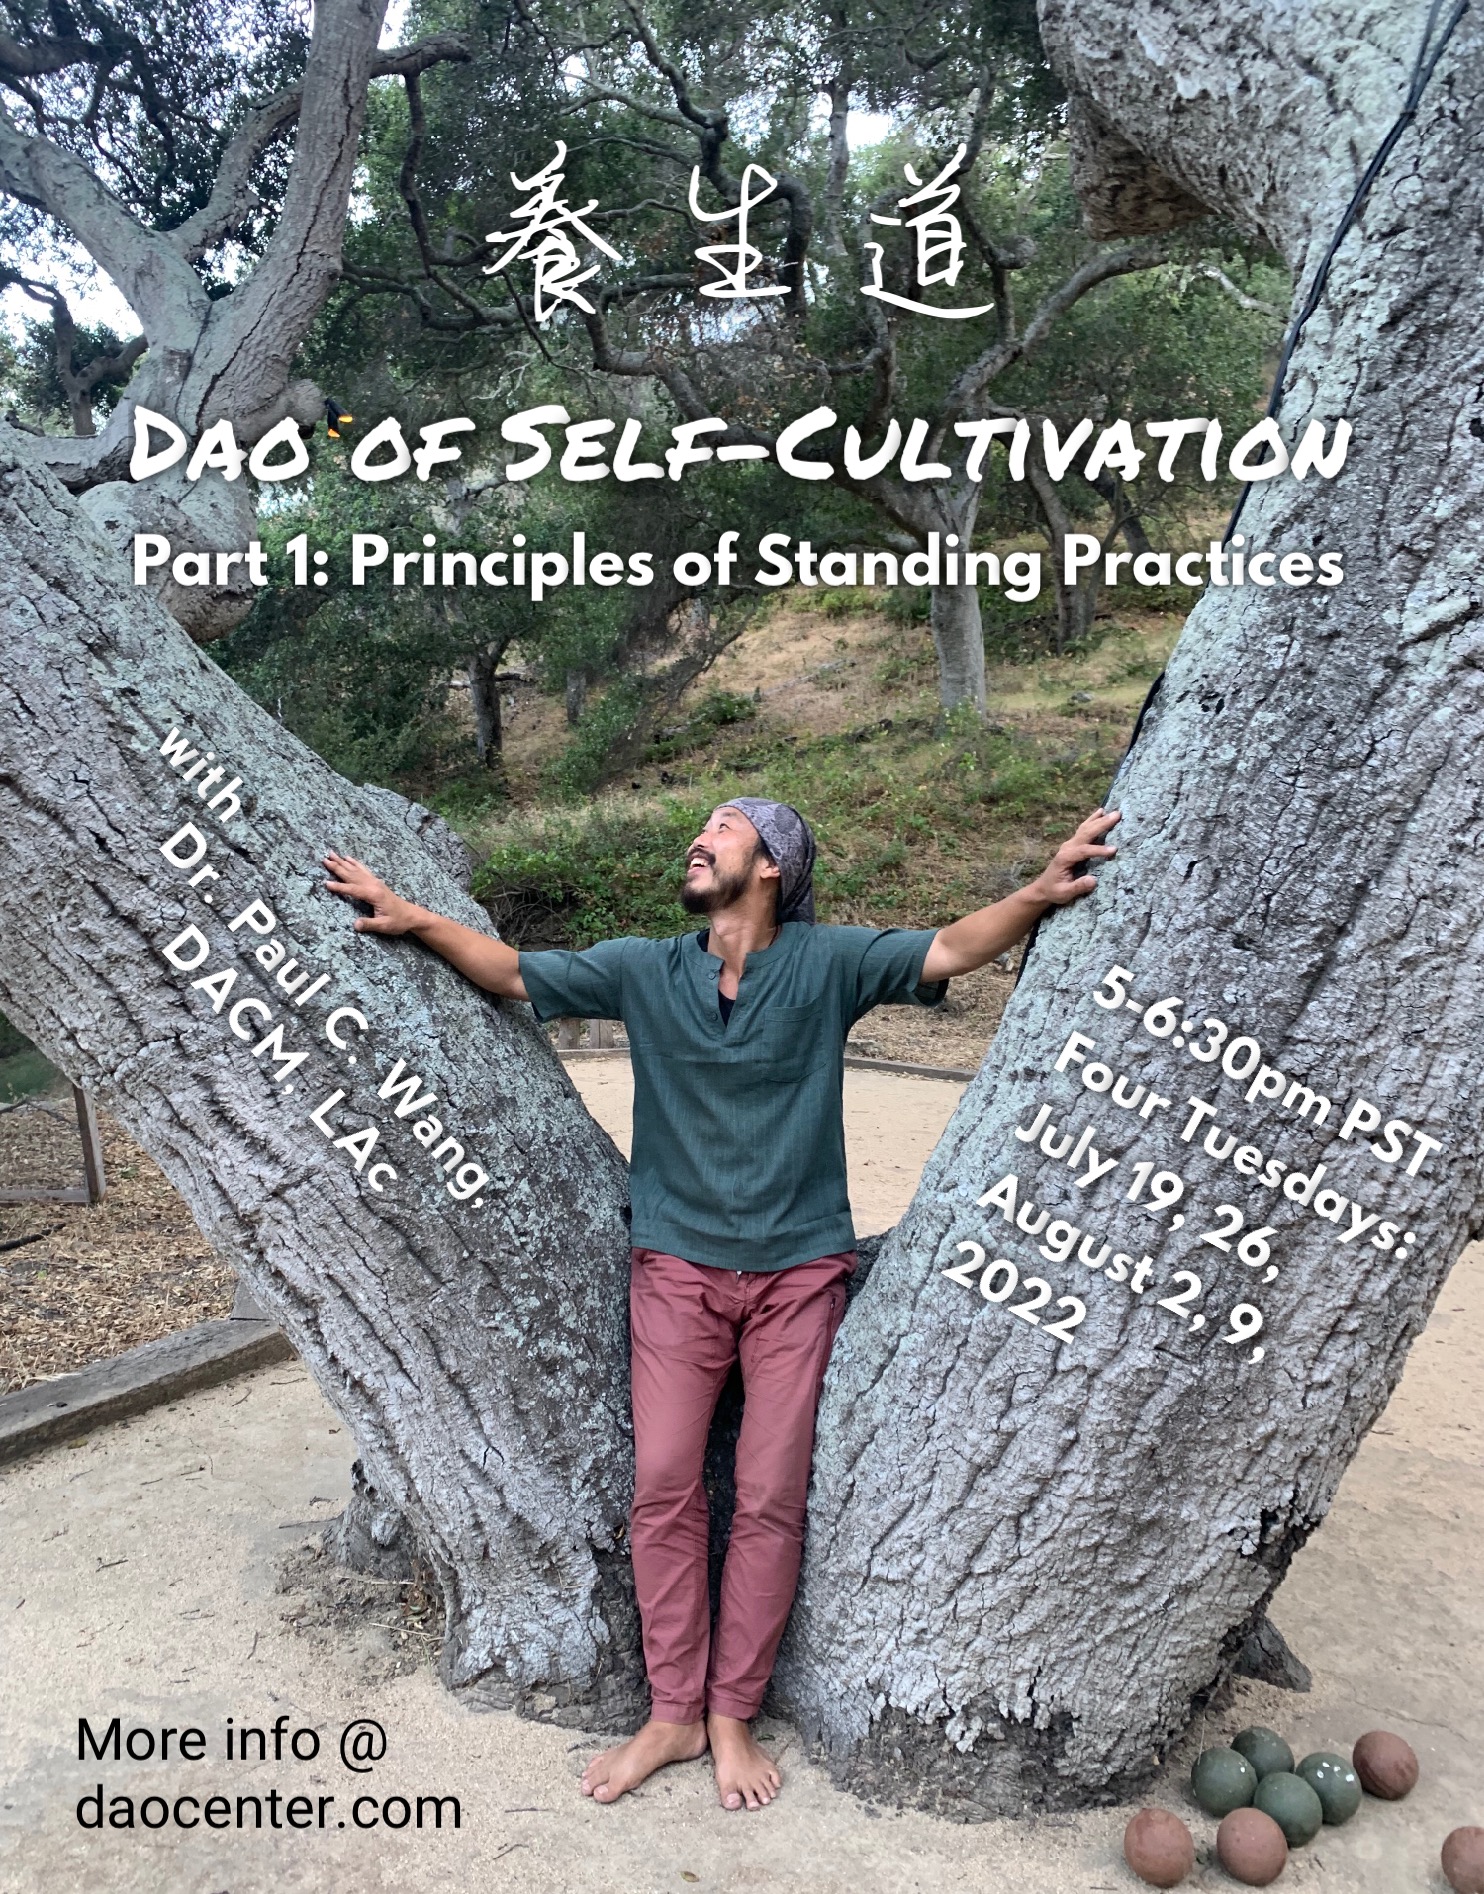 Dao of Self-Cultivation, Part 1